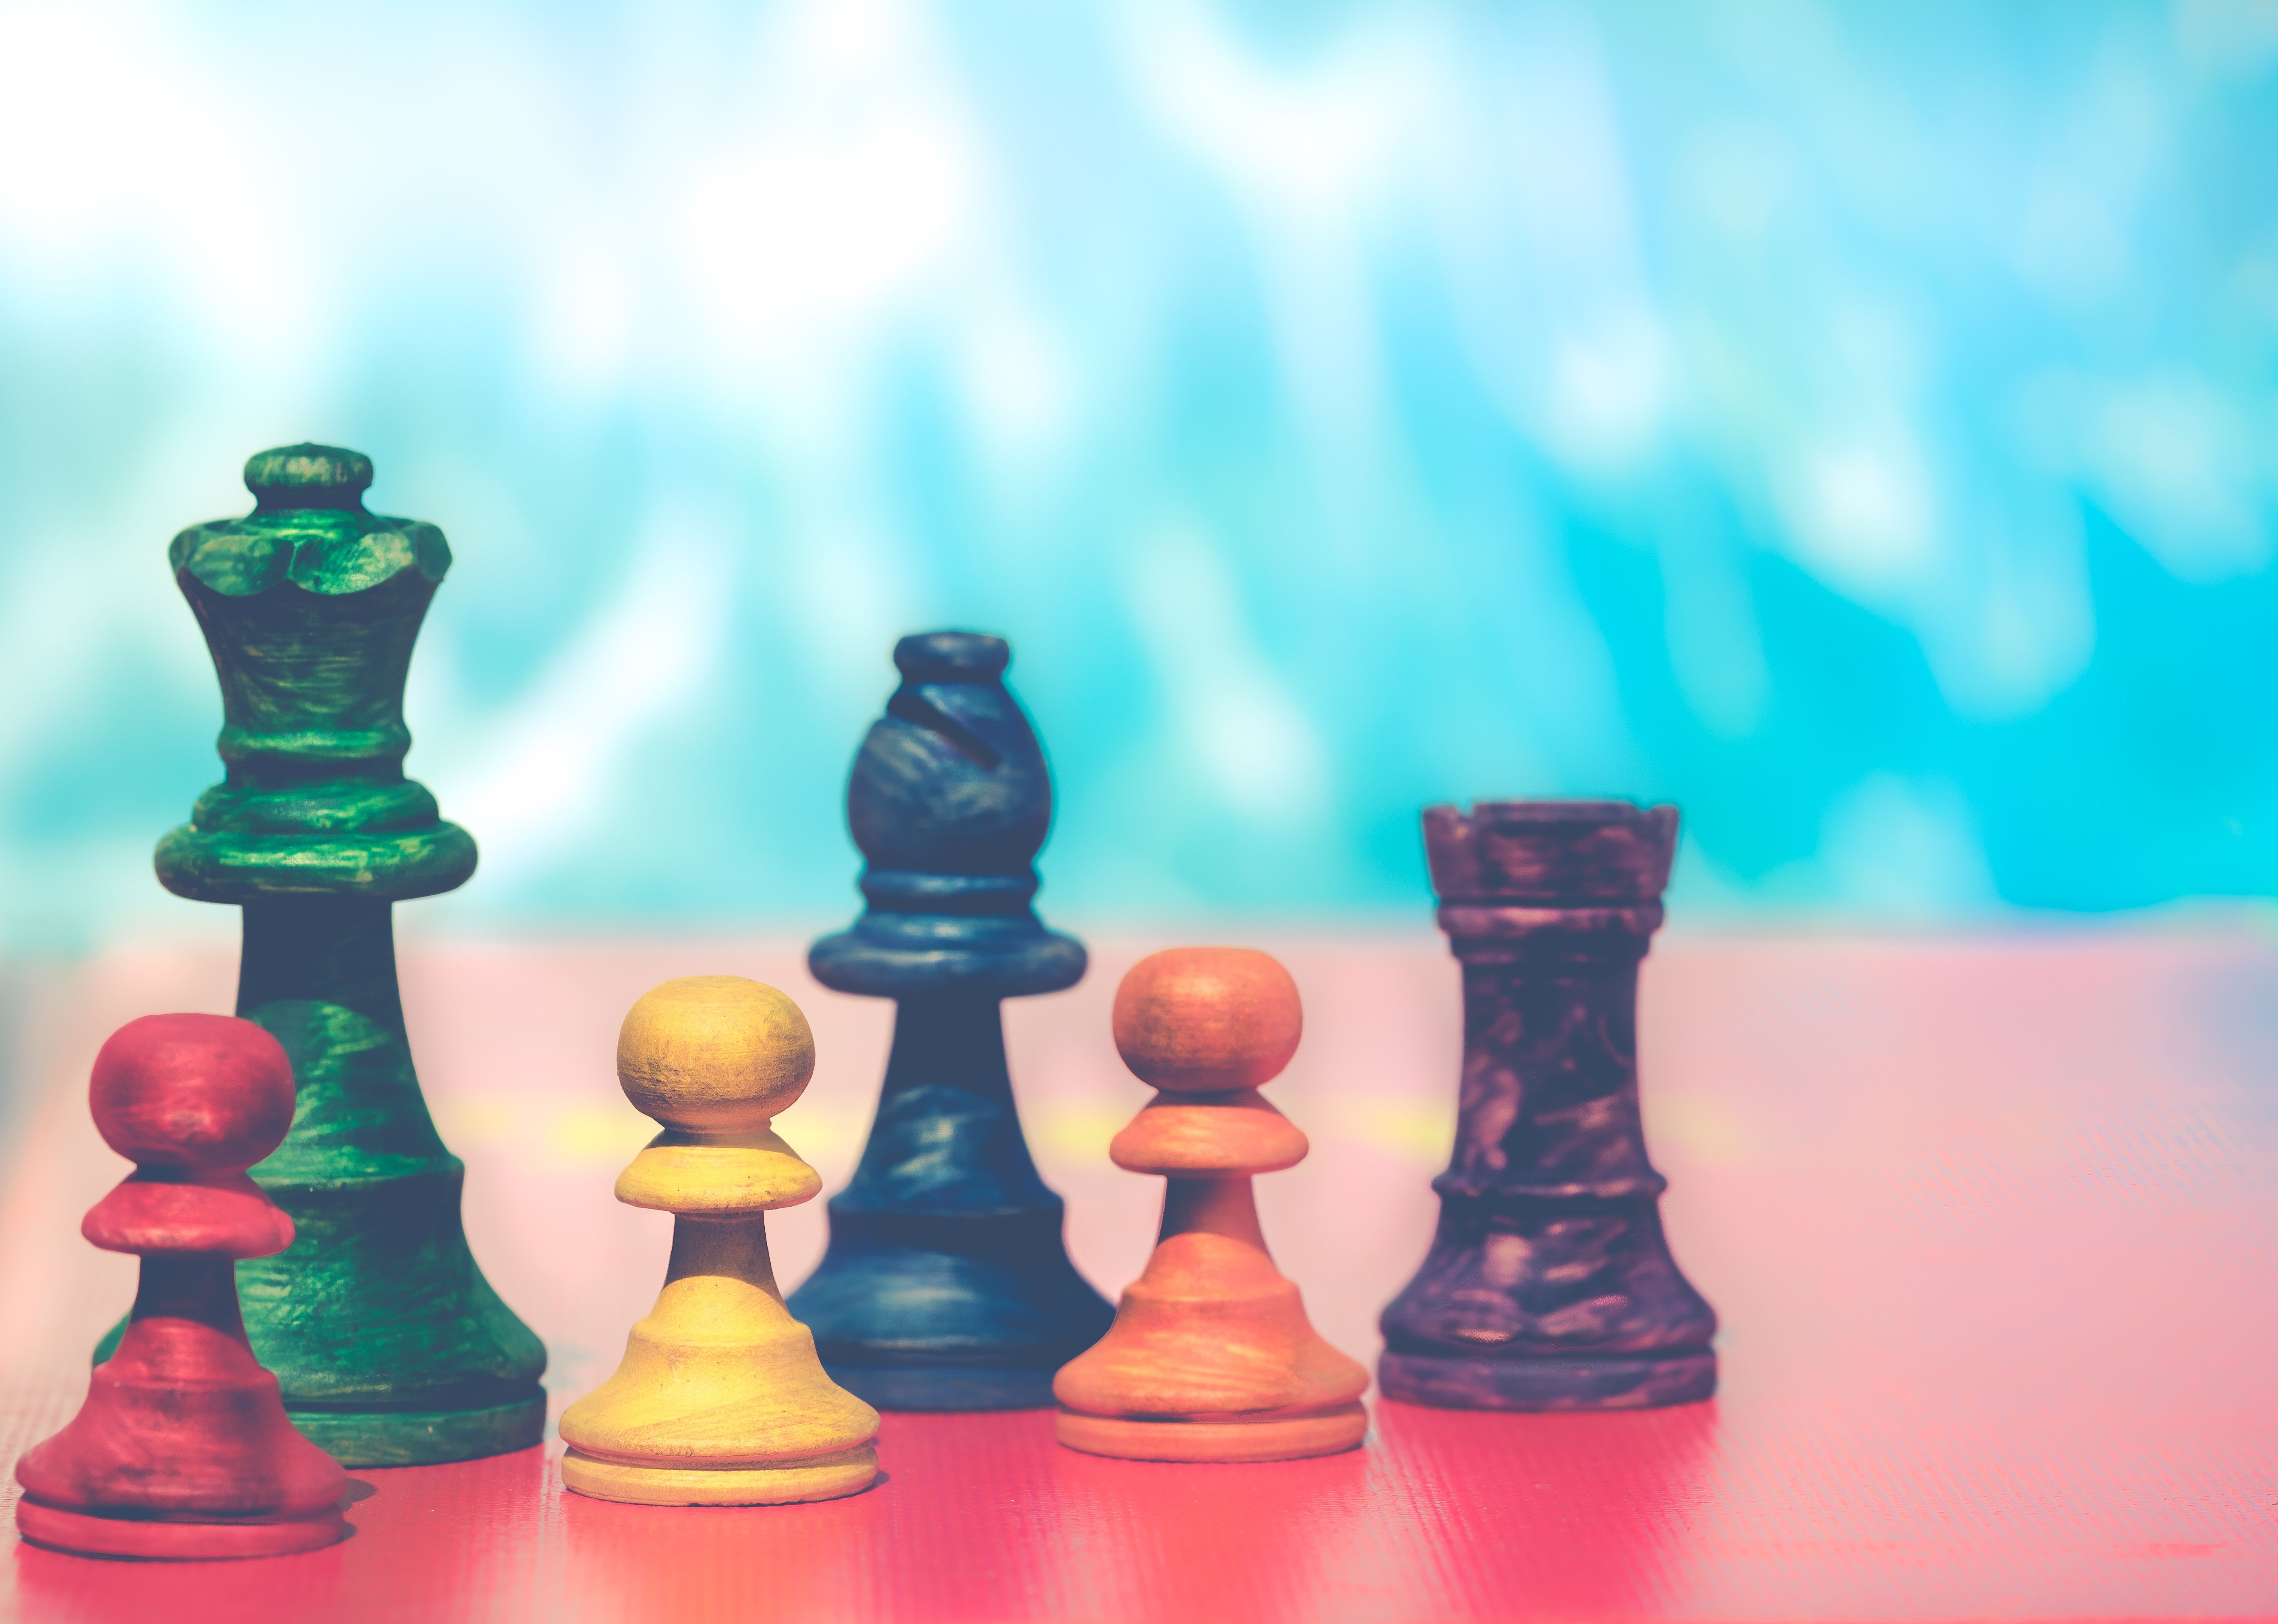 Download wallpaper 3840x2400 chess, pieces, board, game, games 4k ultra hd  16:10 hd background